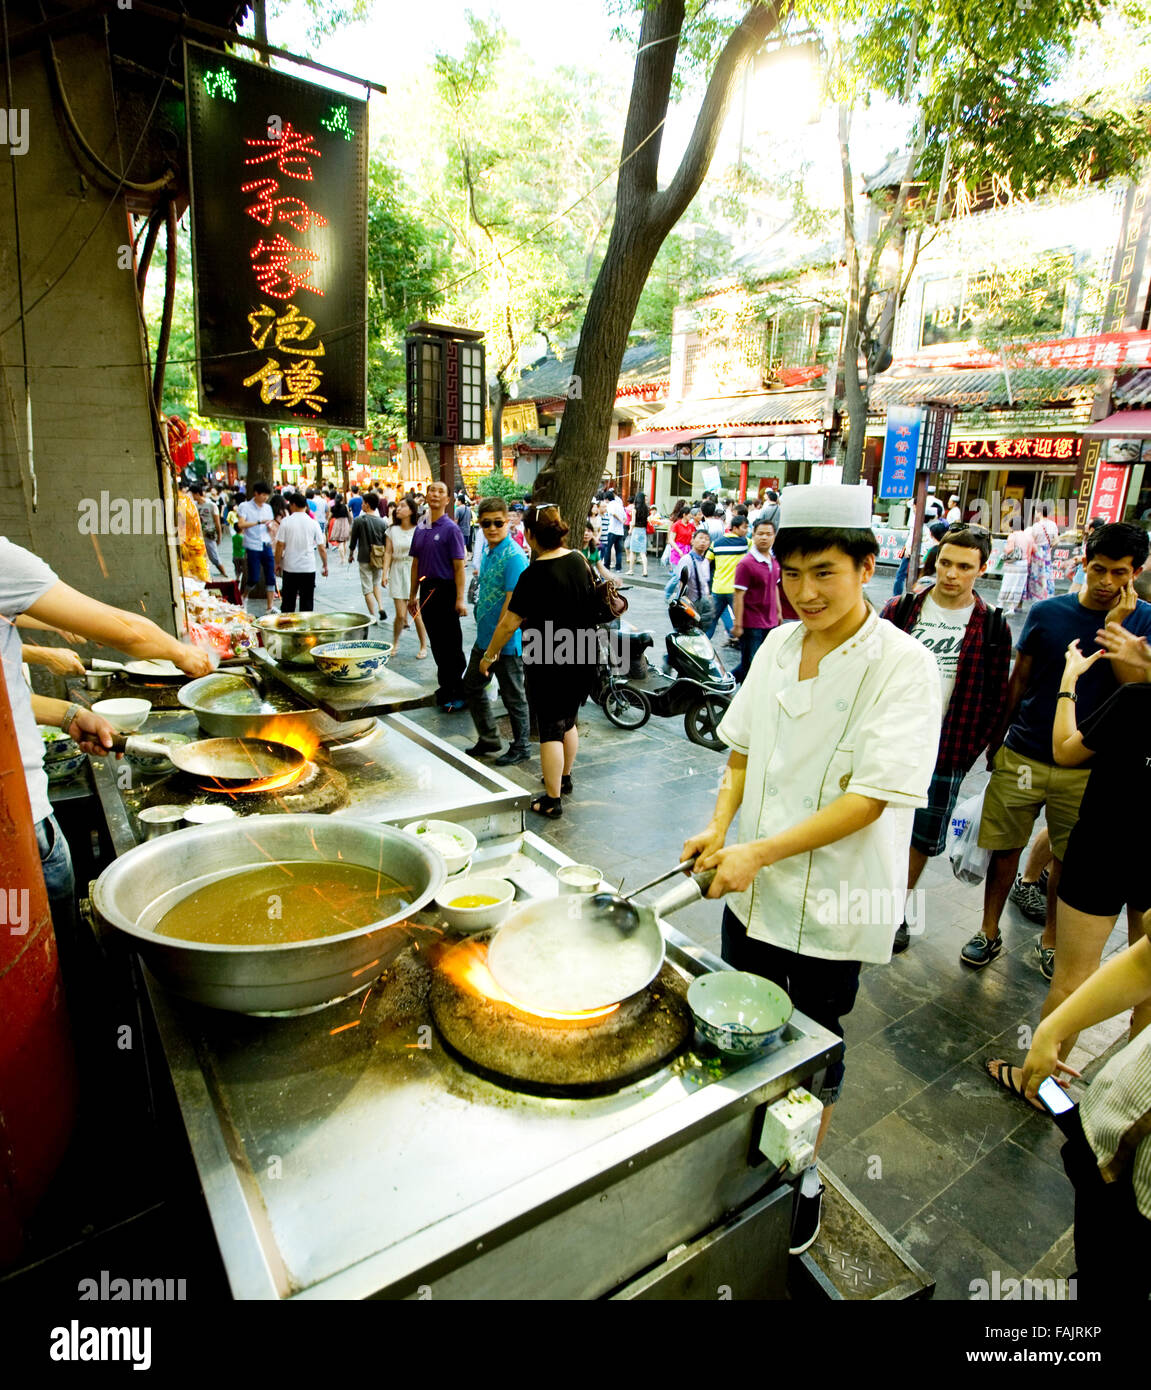 Muslim chef cook South East Asian street dishfood Stock Photo